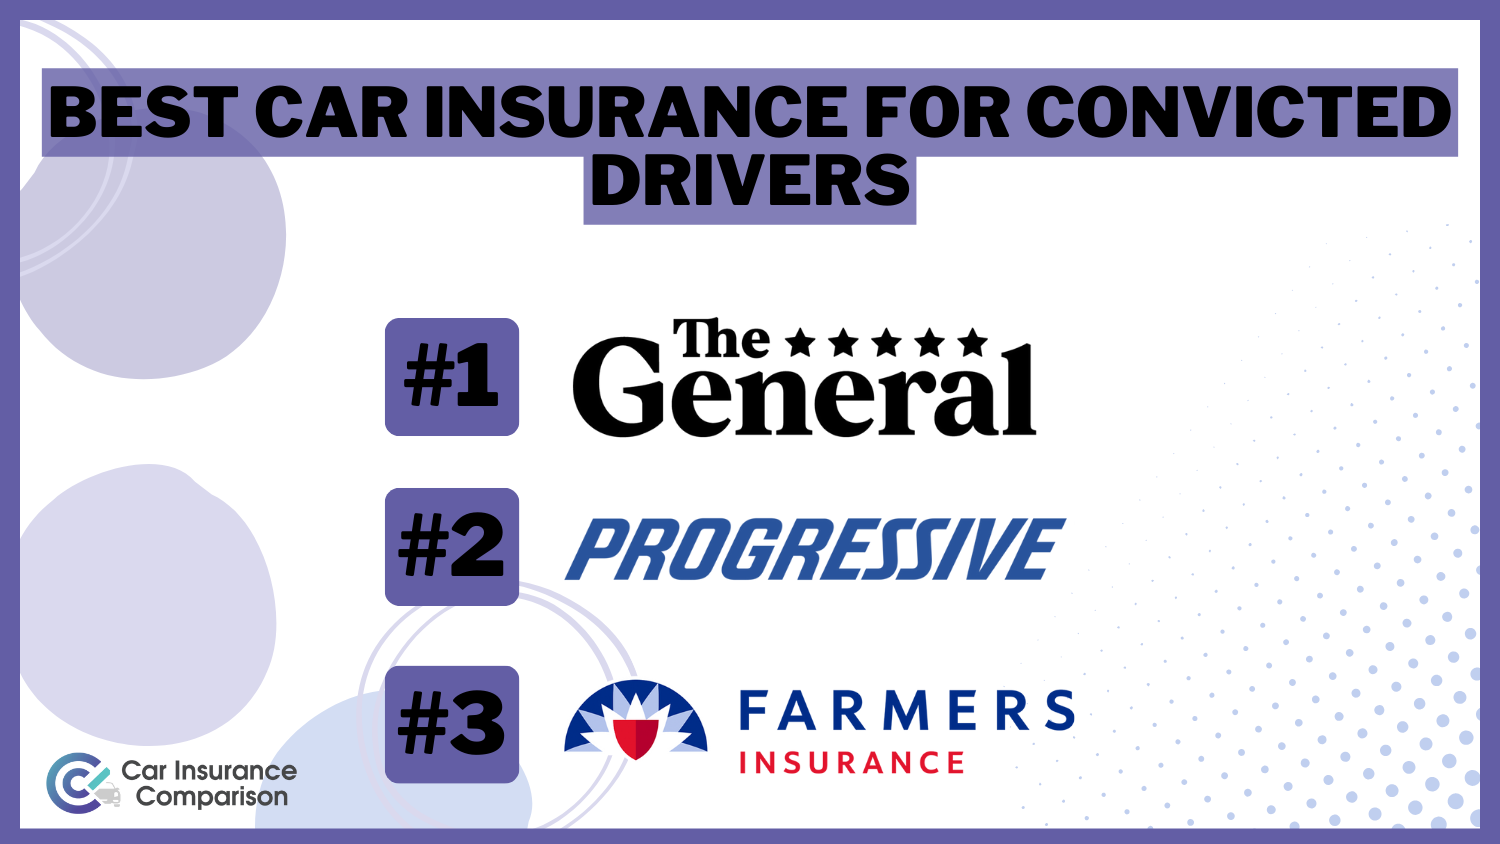 The General, Progressive, and Farmers: Best Car Insurance for Convicted Drivers